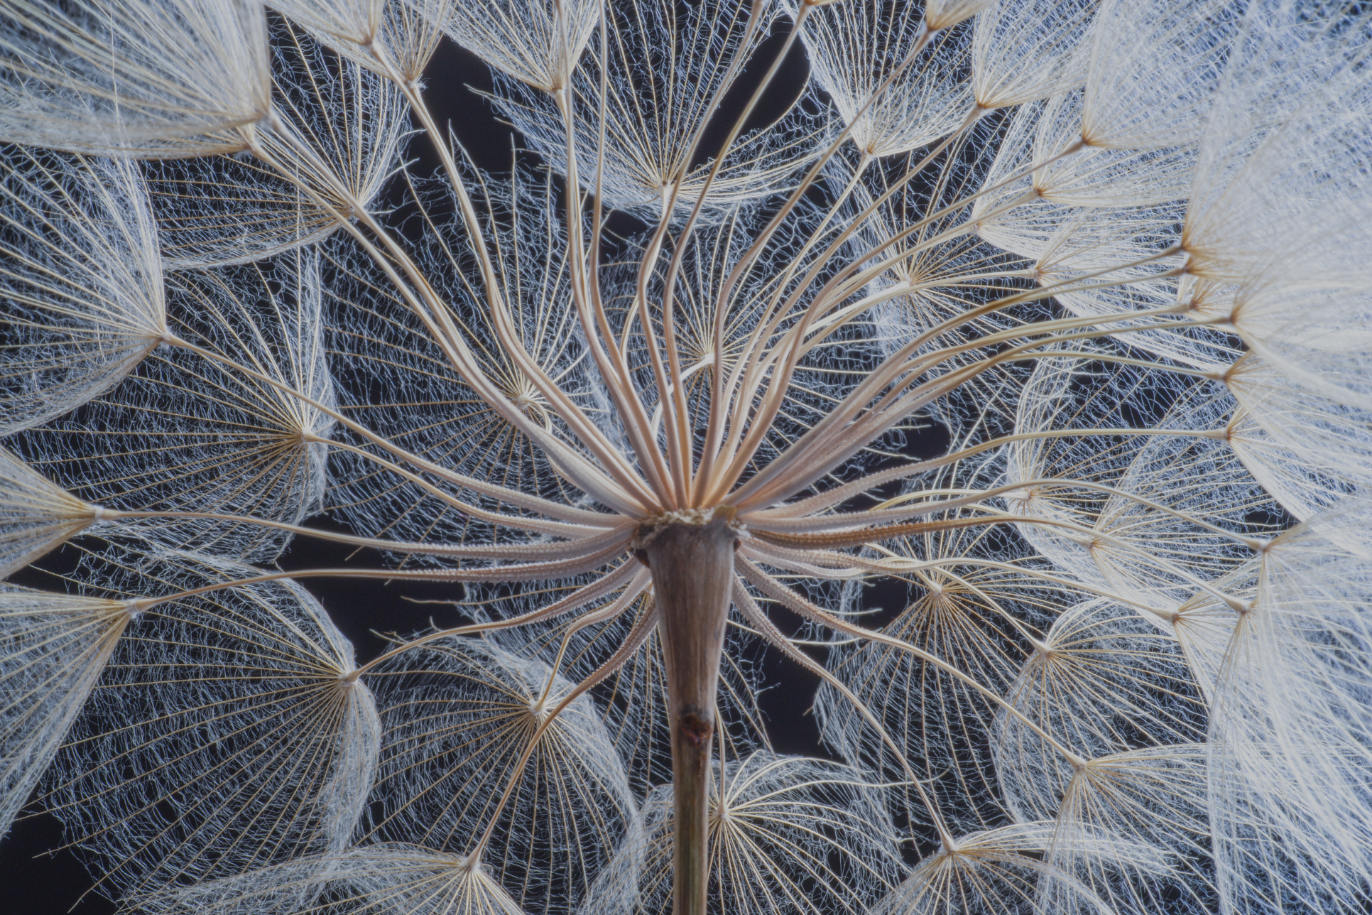 A close-up of a dandelion with seeds, showcasing the delicate beauty of nature's dispersal mechanism.